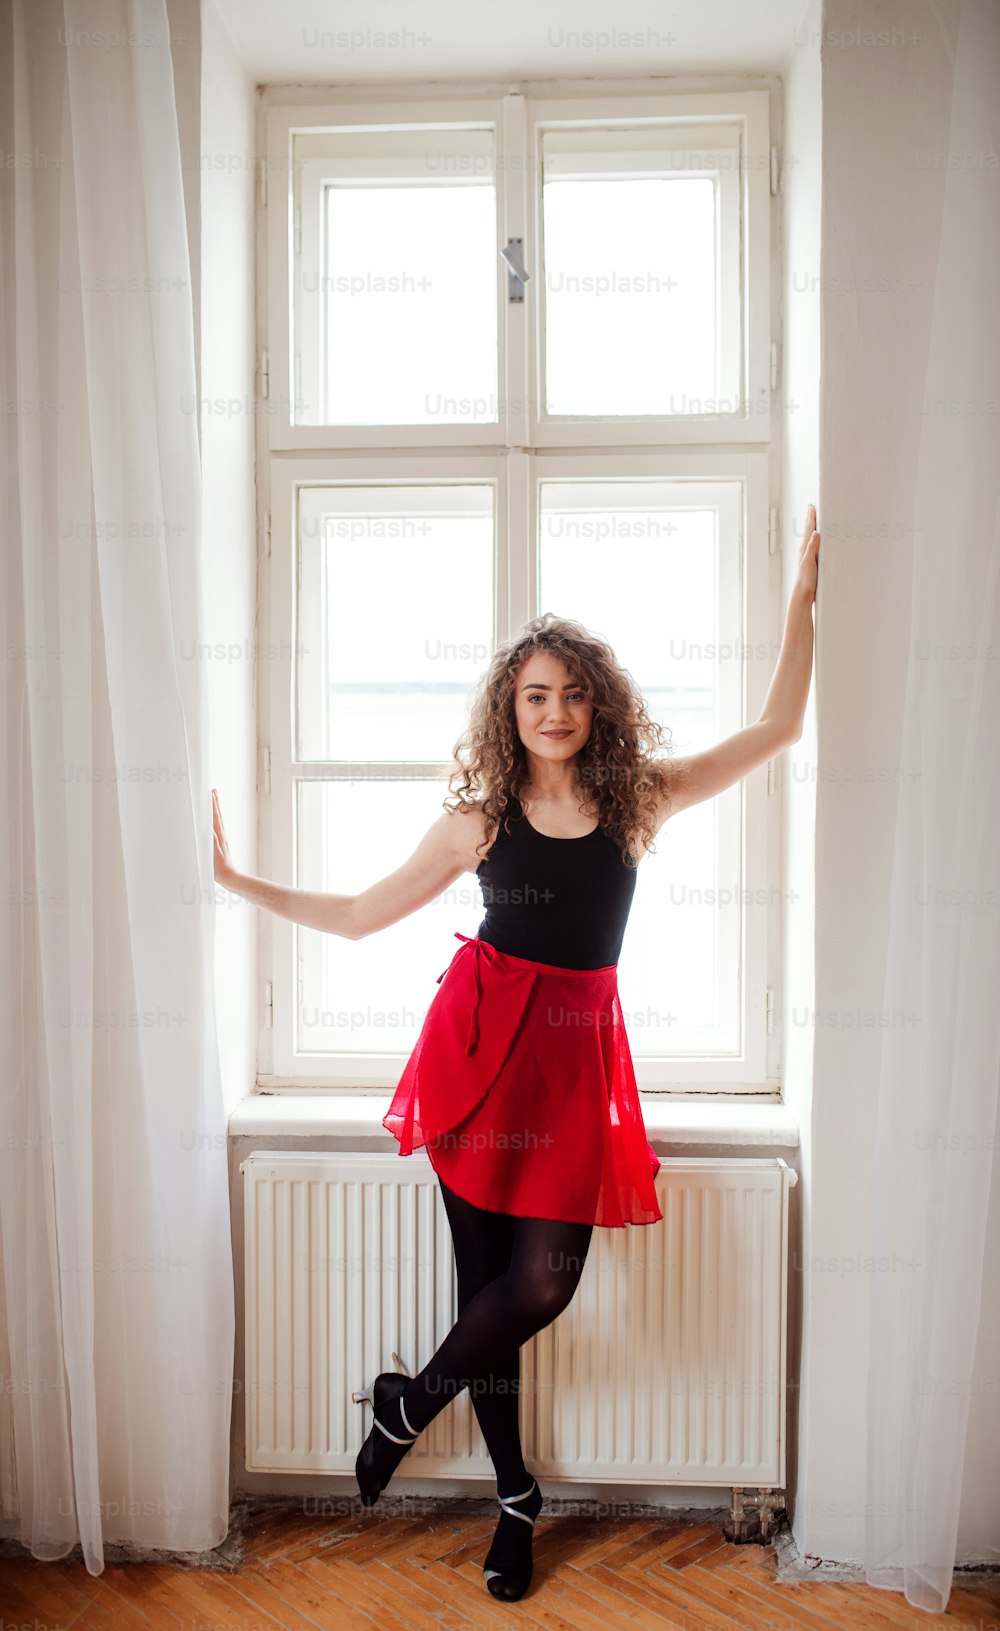 A portrait of young dance woman teacher indoors standing by window. Copy space.